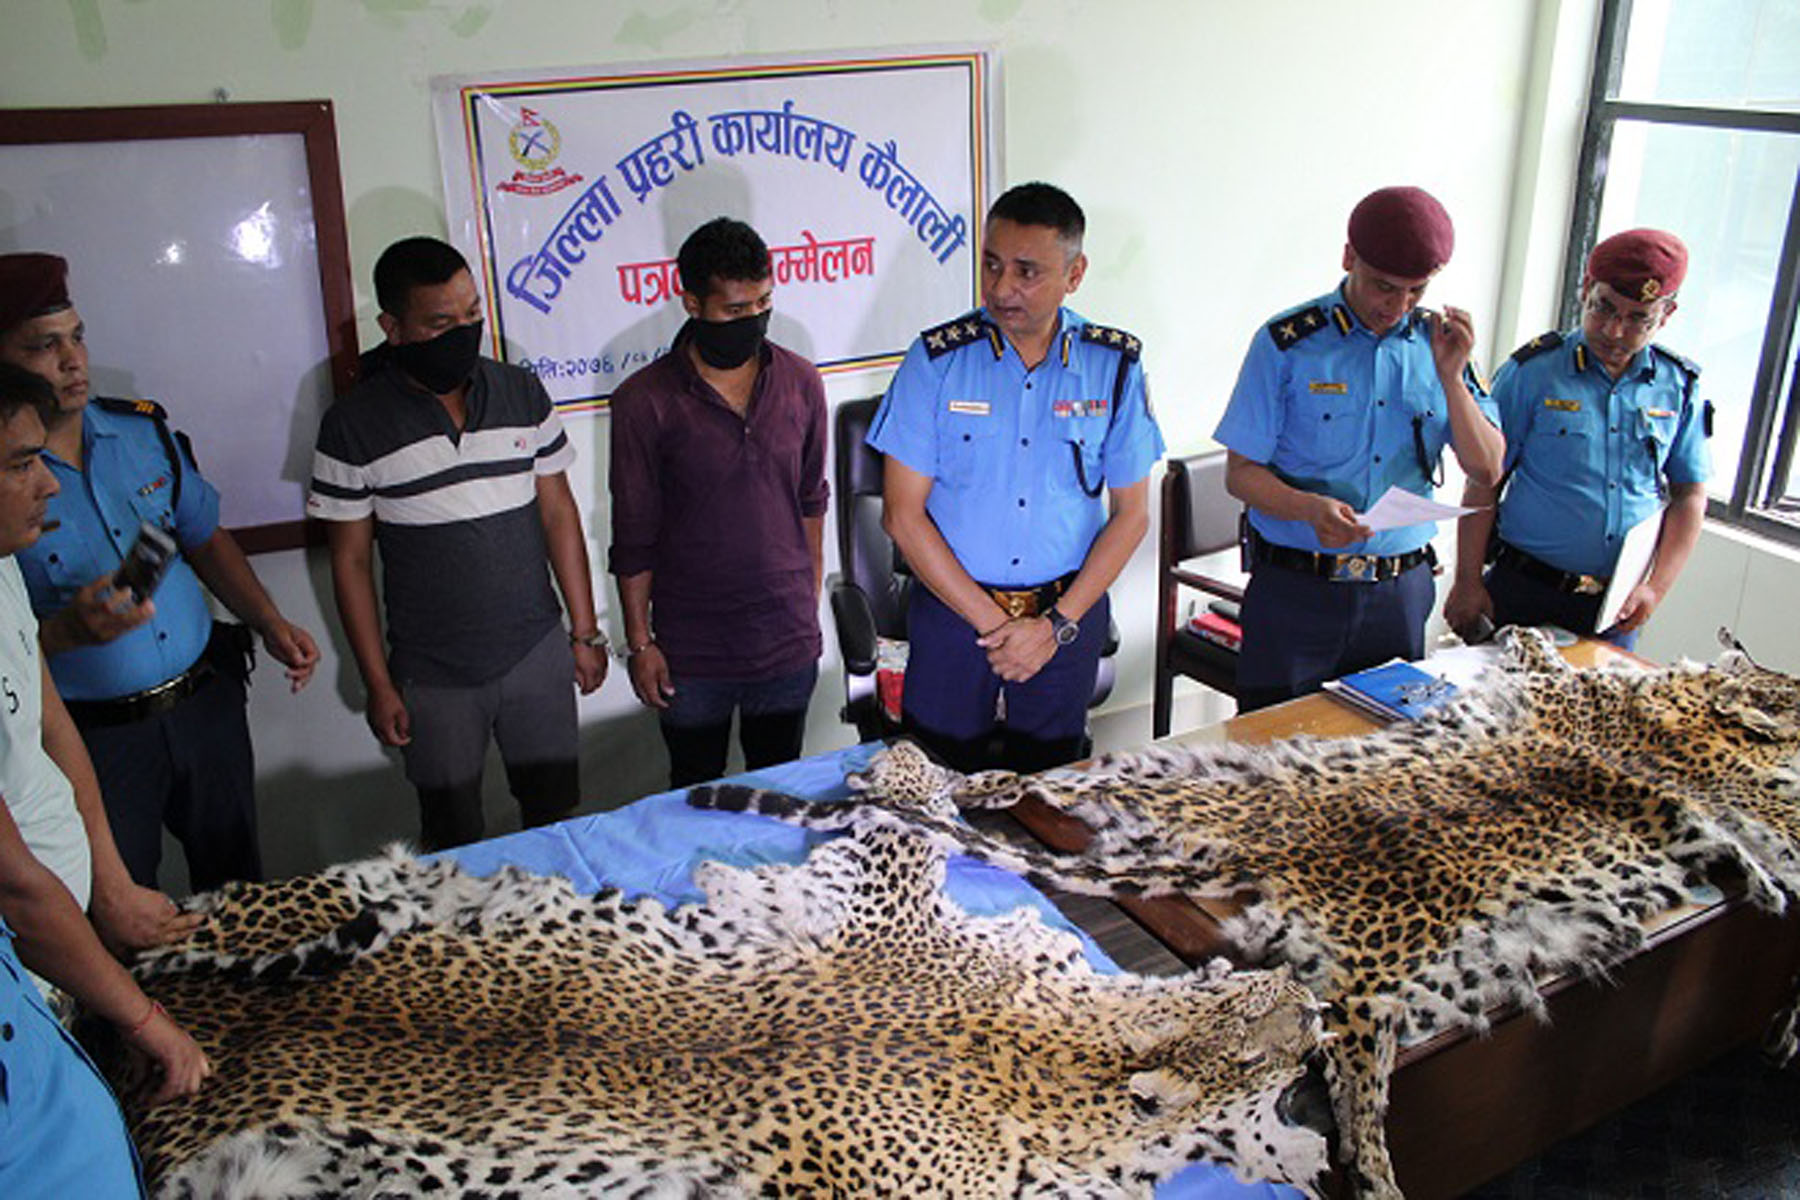 Two held with leopard hides